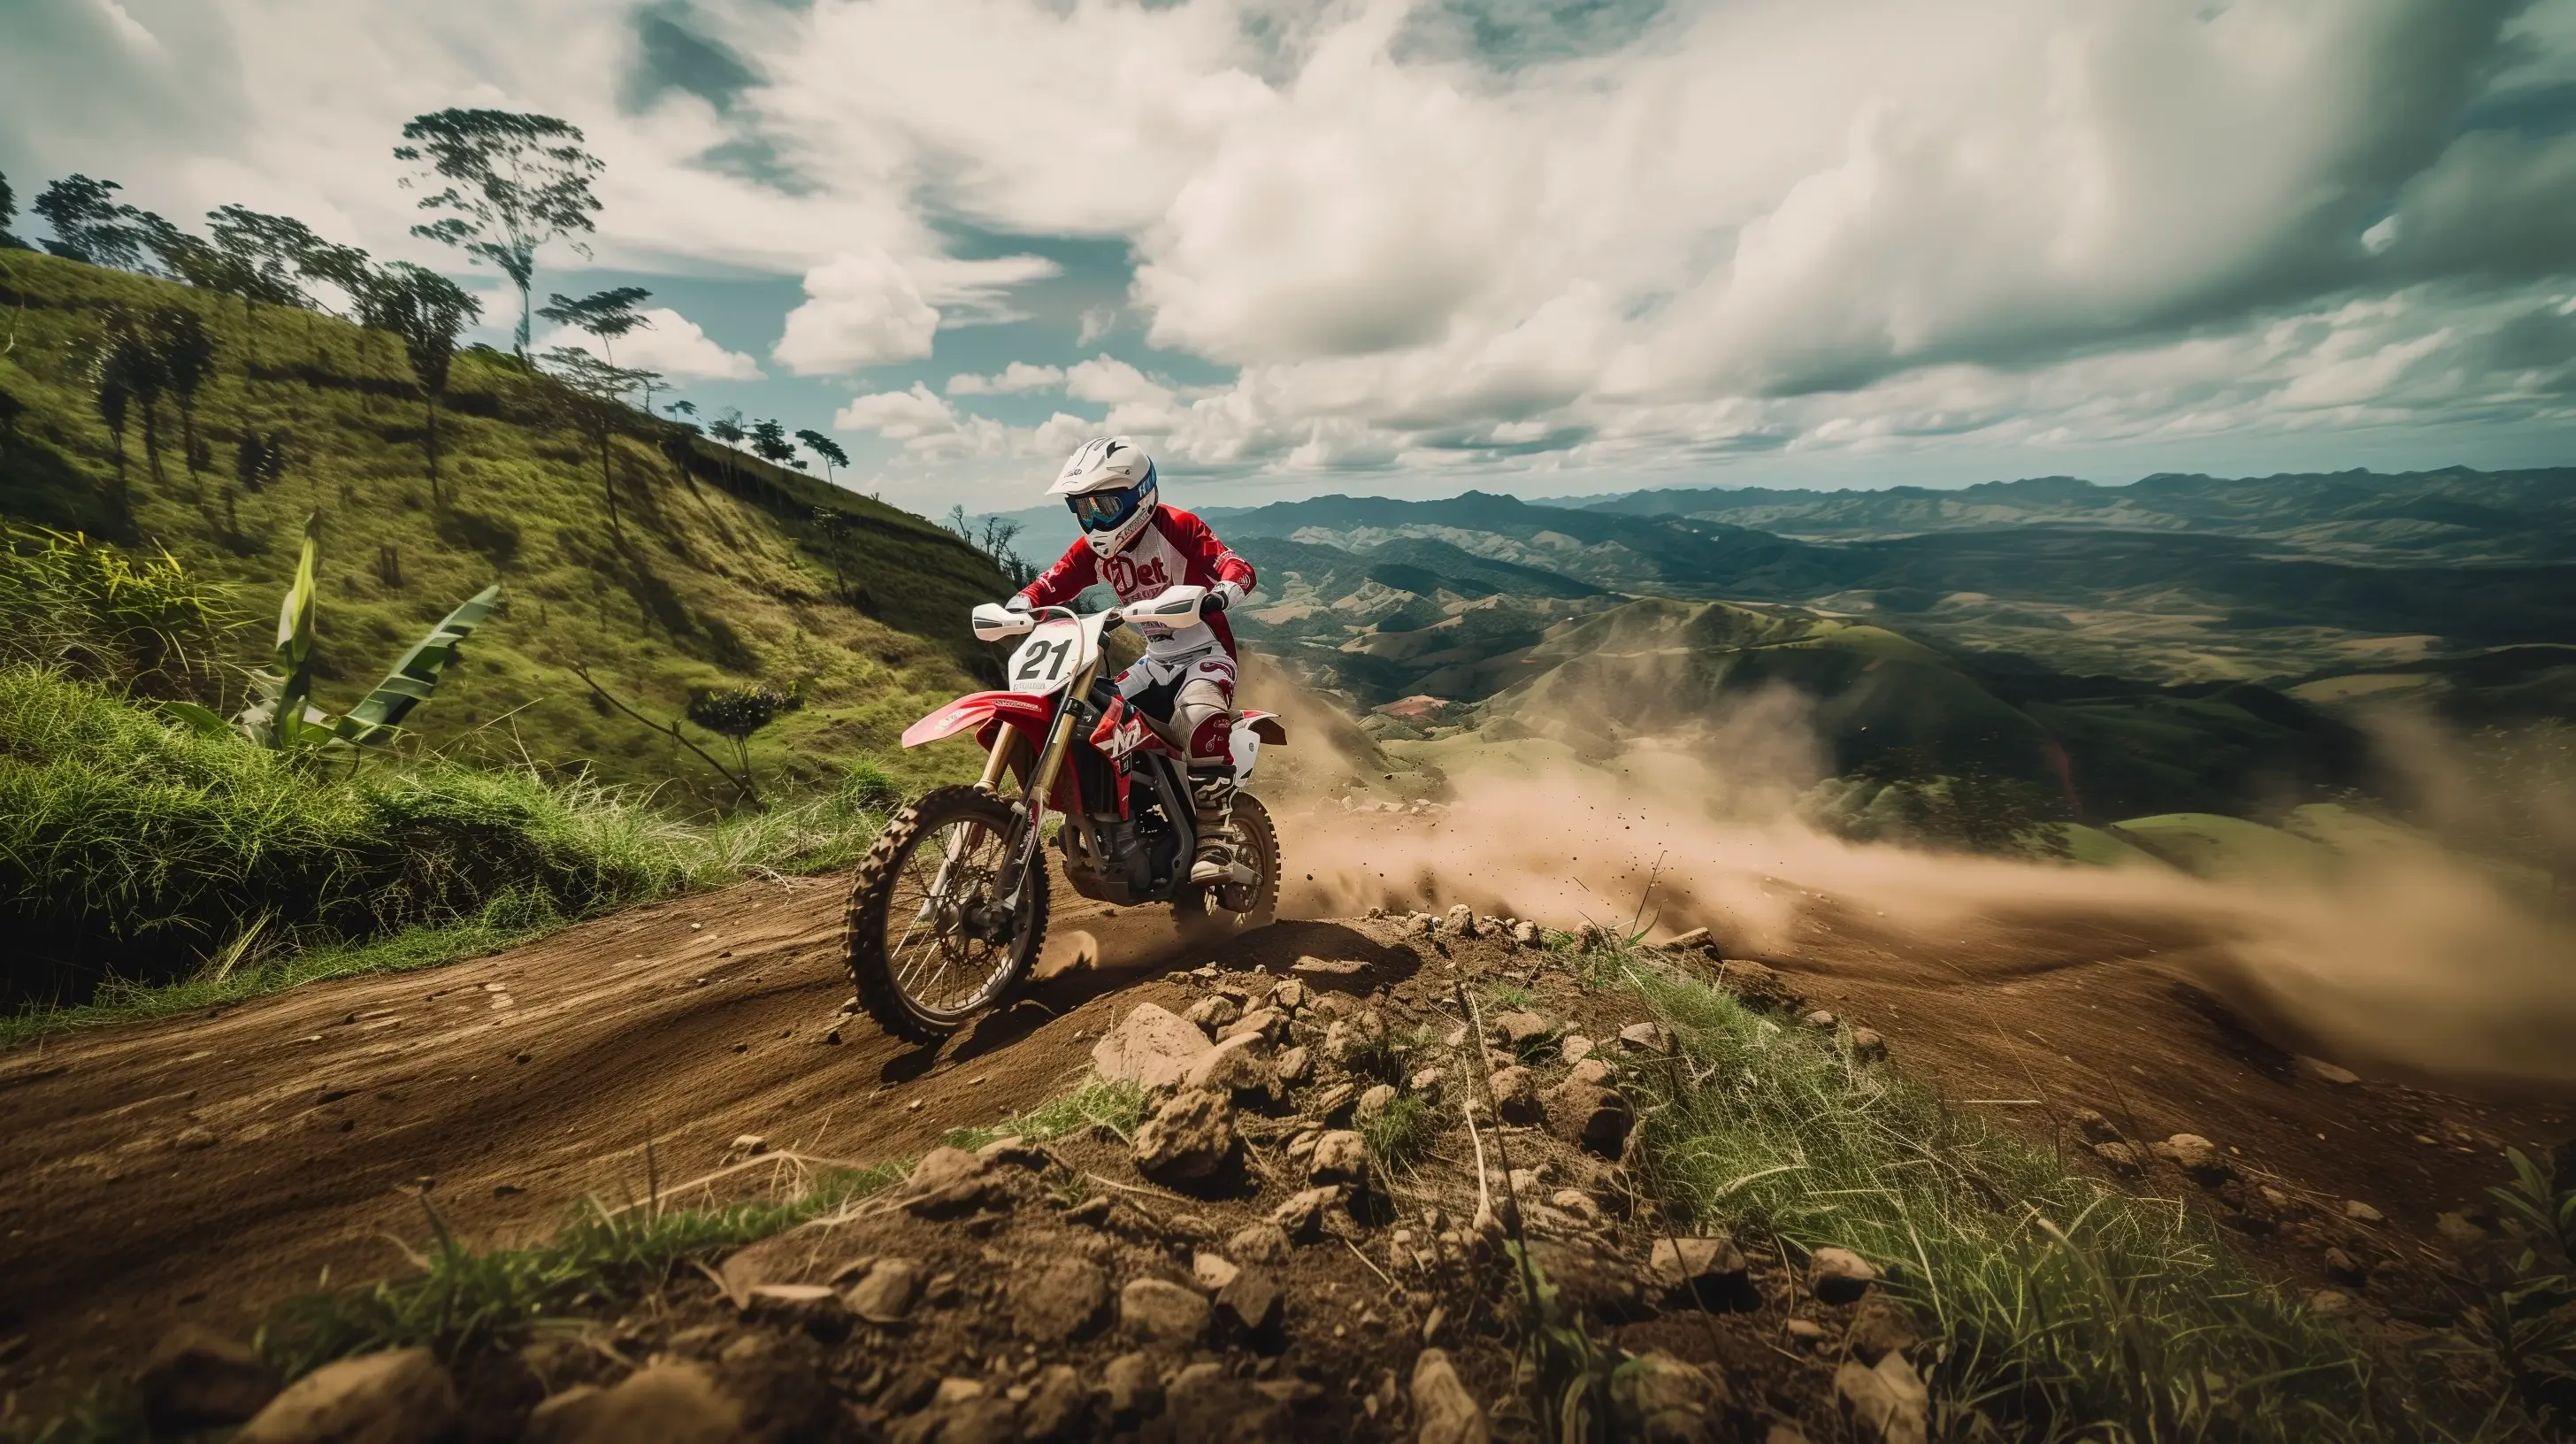 A picture of a motorcycle rider in the mountains of Panama.